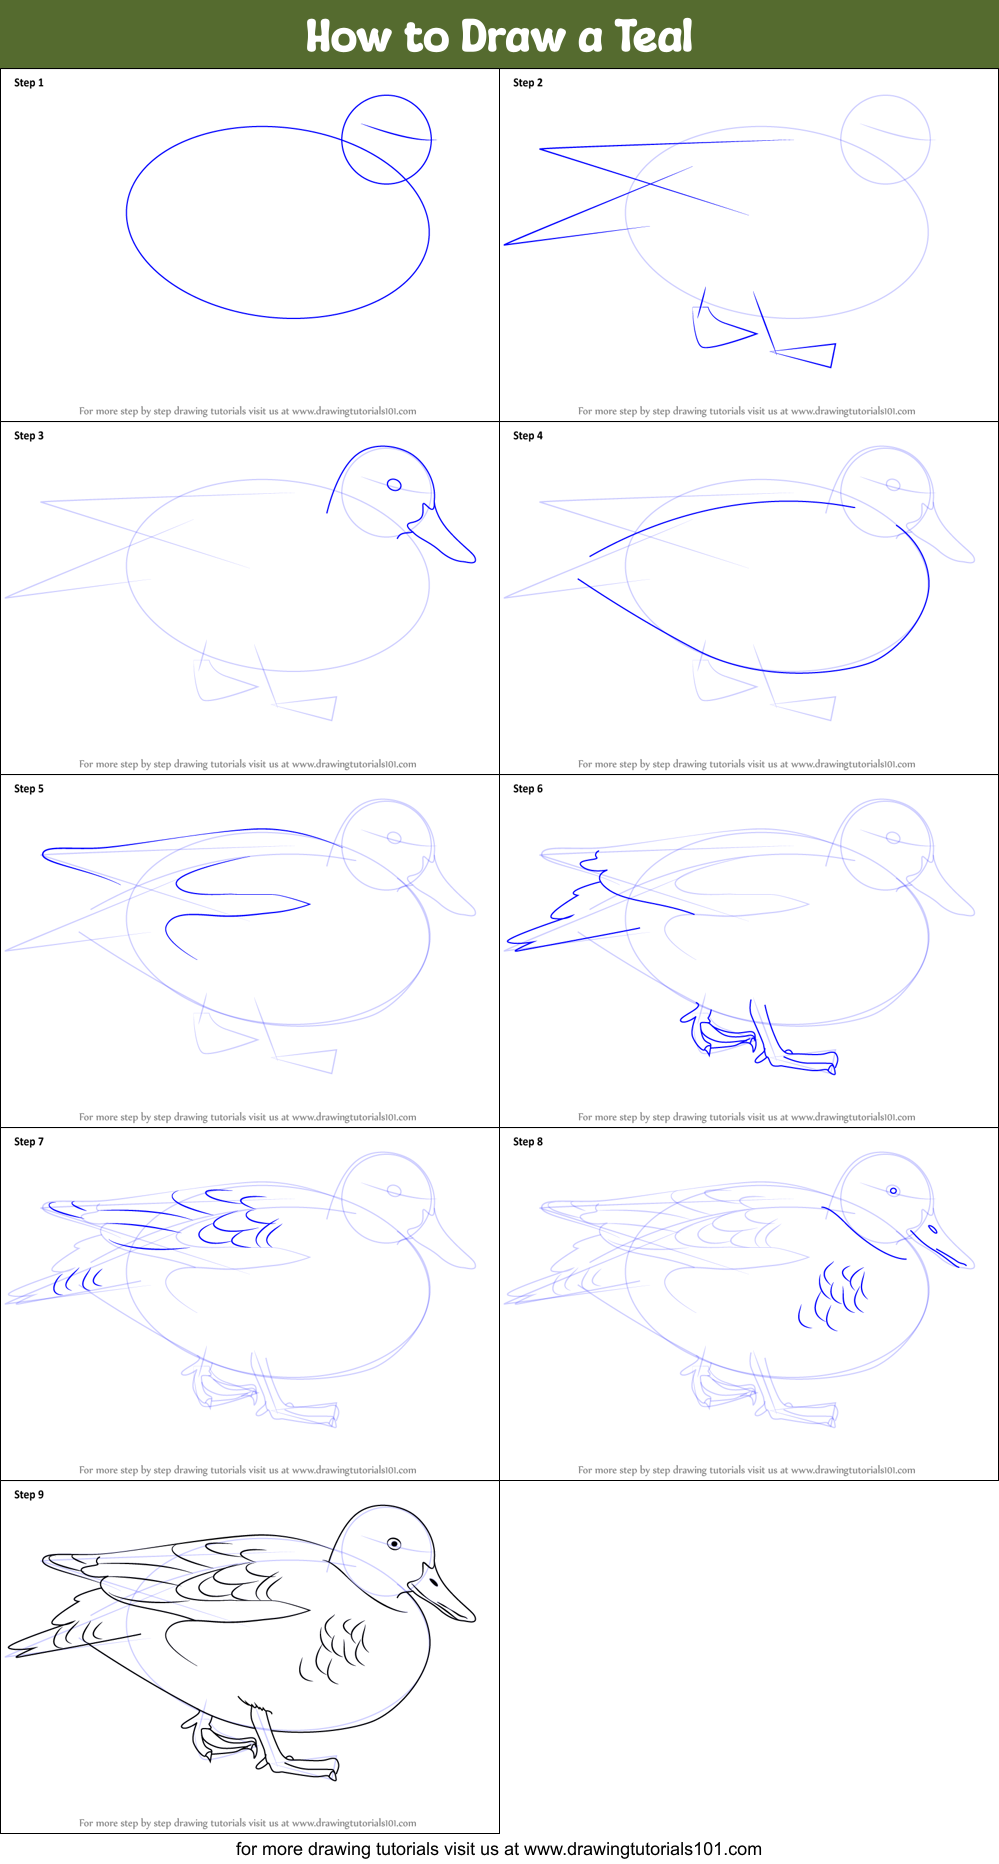 How to Draw a Teal printable step by step drawing sheet